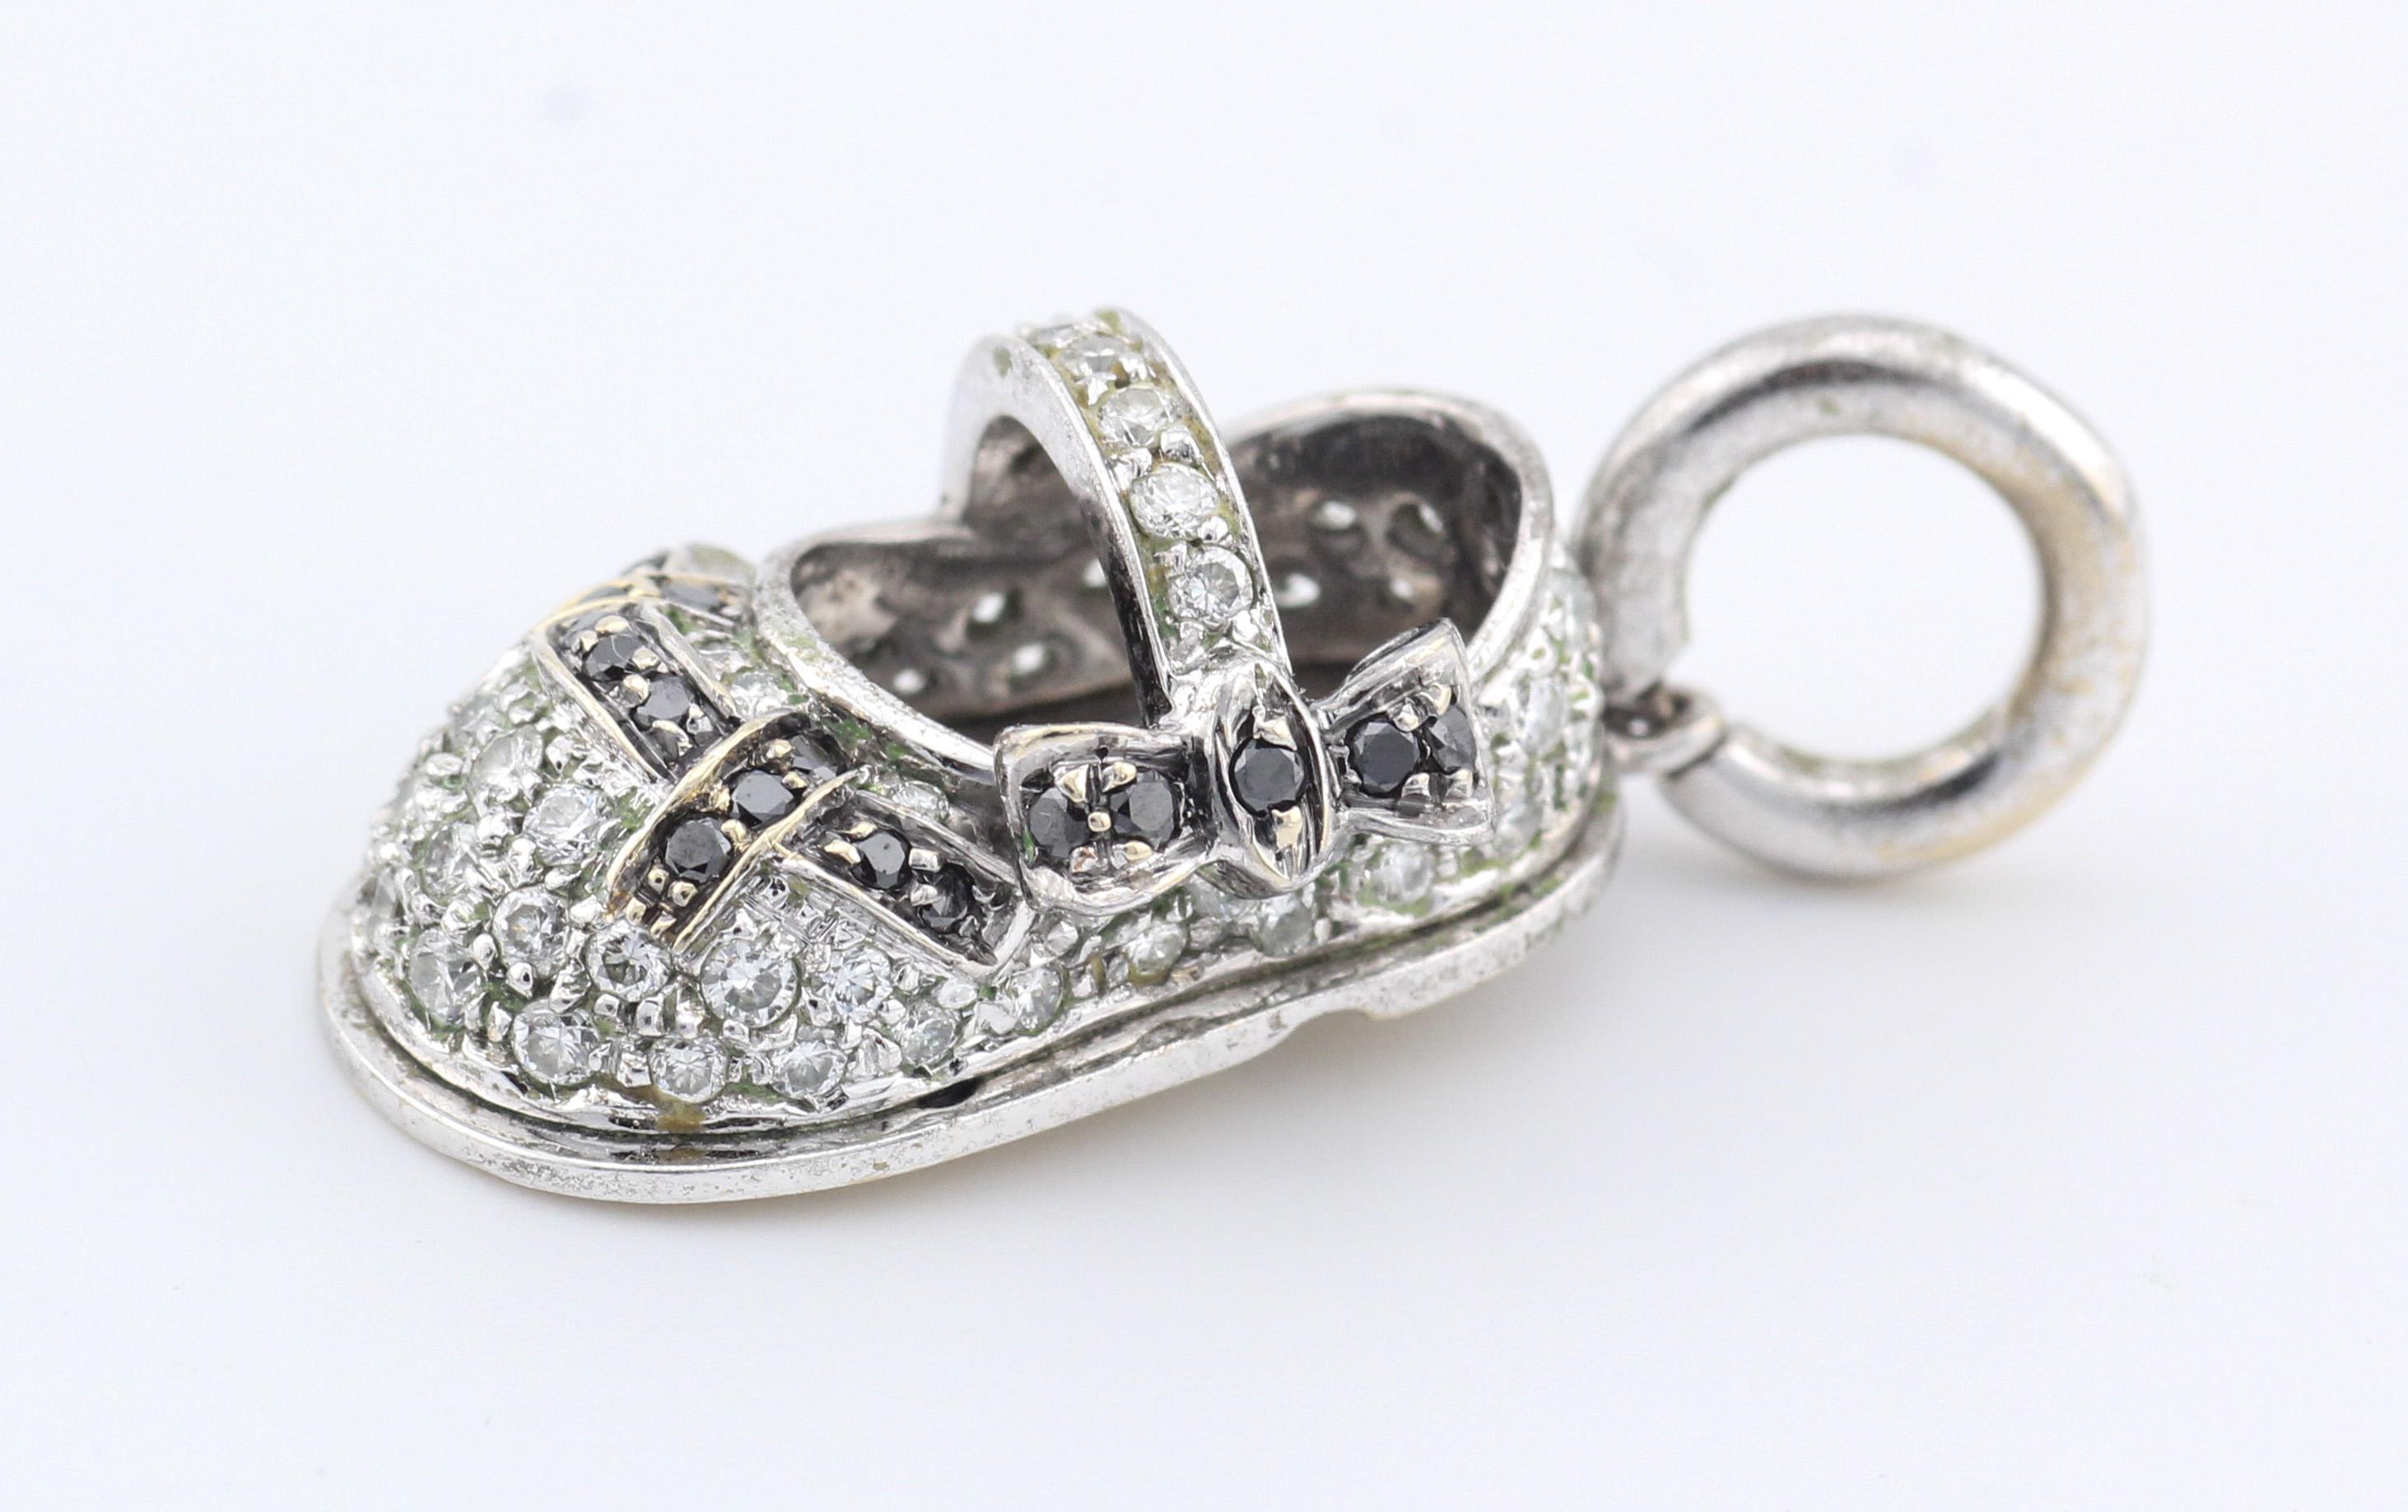 Introducing the exquisite Aaron Basha Diamond 18K White Gold Baby Shoe Charm Pendant, a mesmerizing embodiment of elegance and charm. Crafted with meticulous attention to detail, this enchanting pendant is a timeless symbol of innocence and